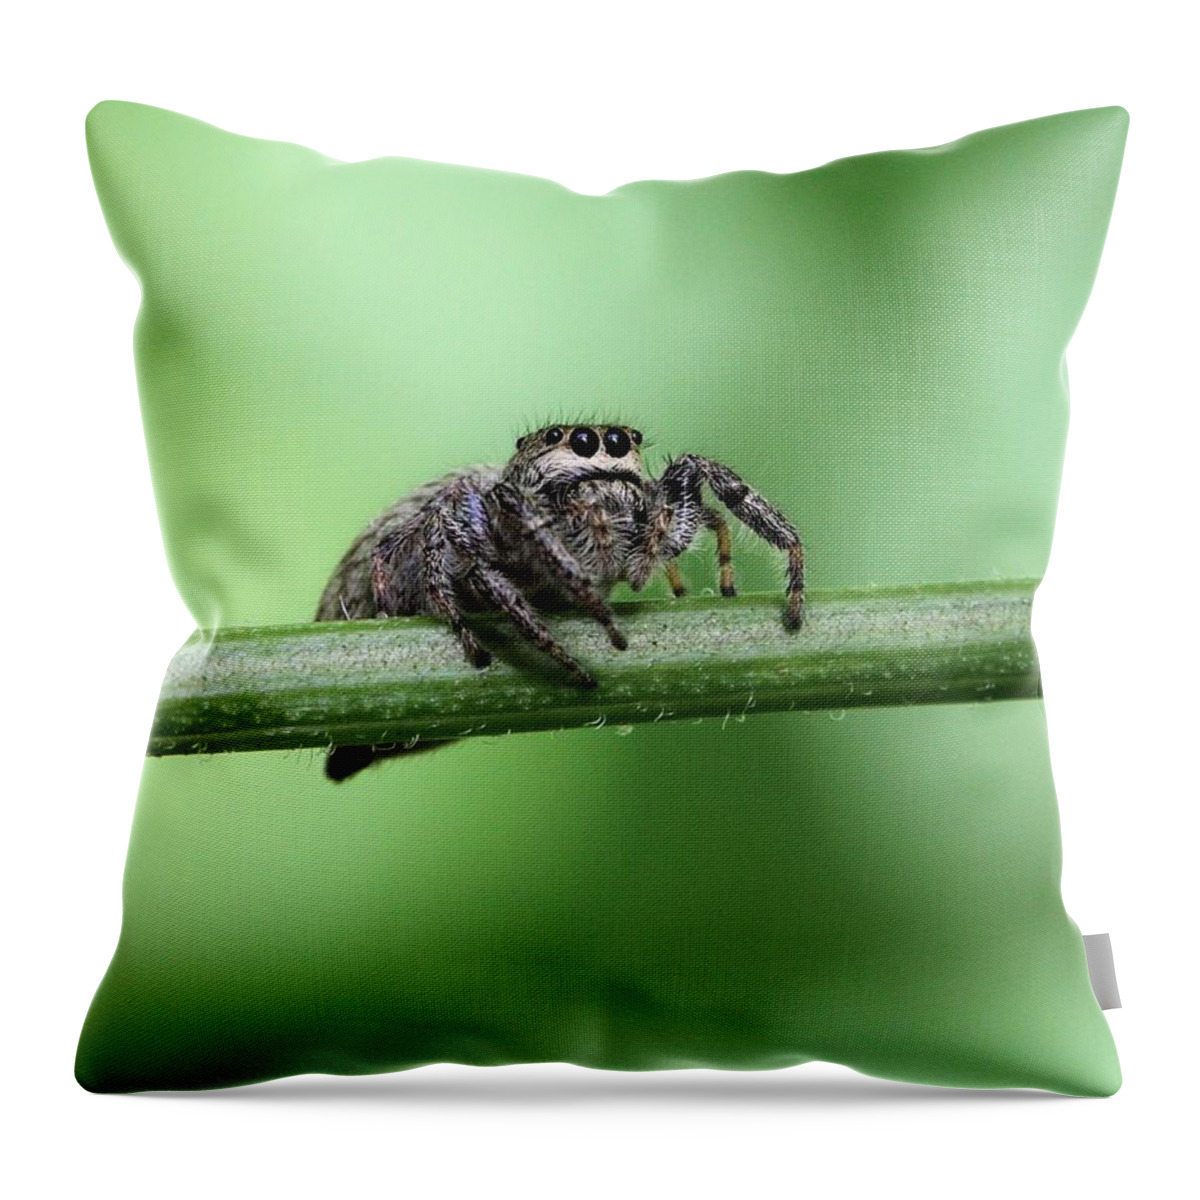 Jumping Spider Throw Pillow featuring the photograph Cute Spider by Doris Potter